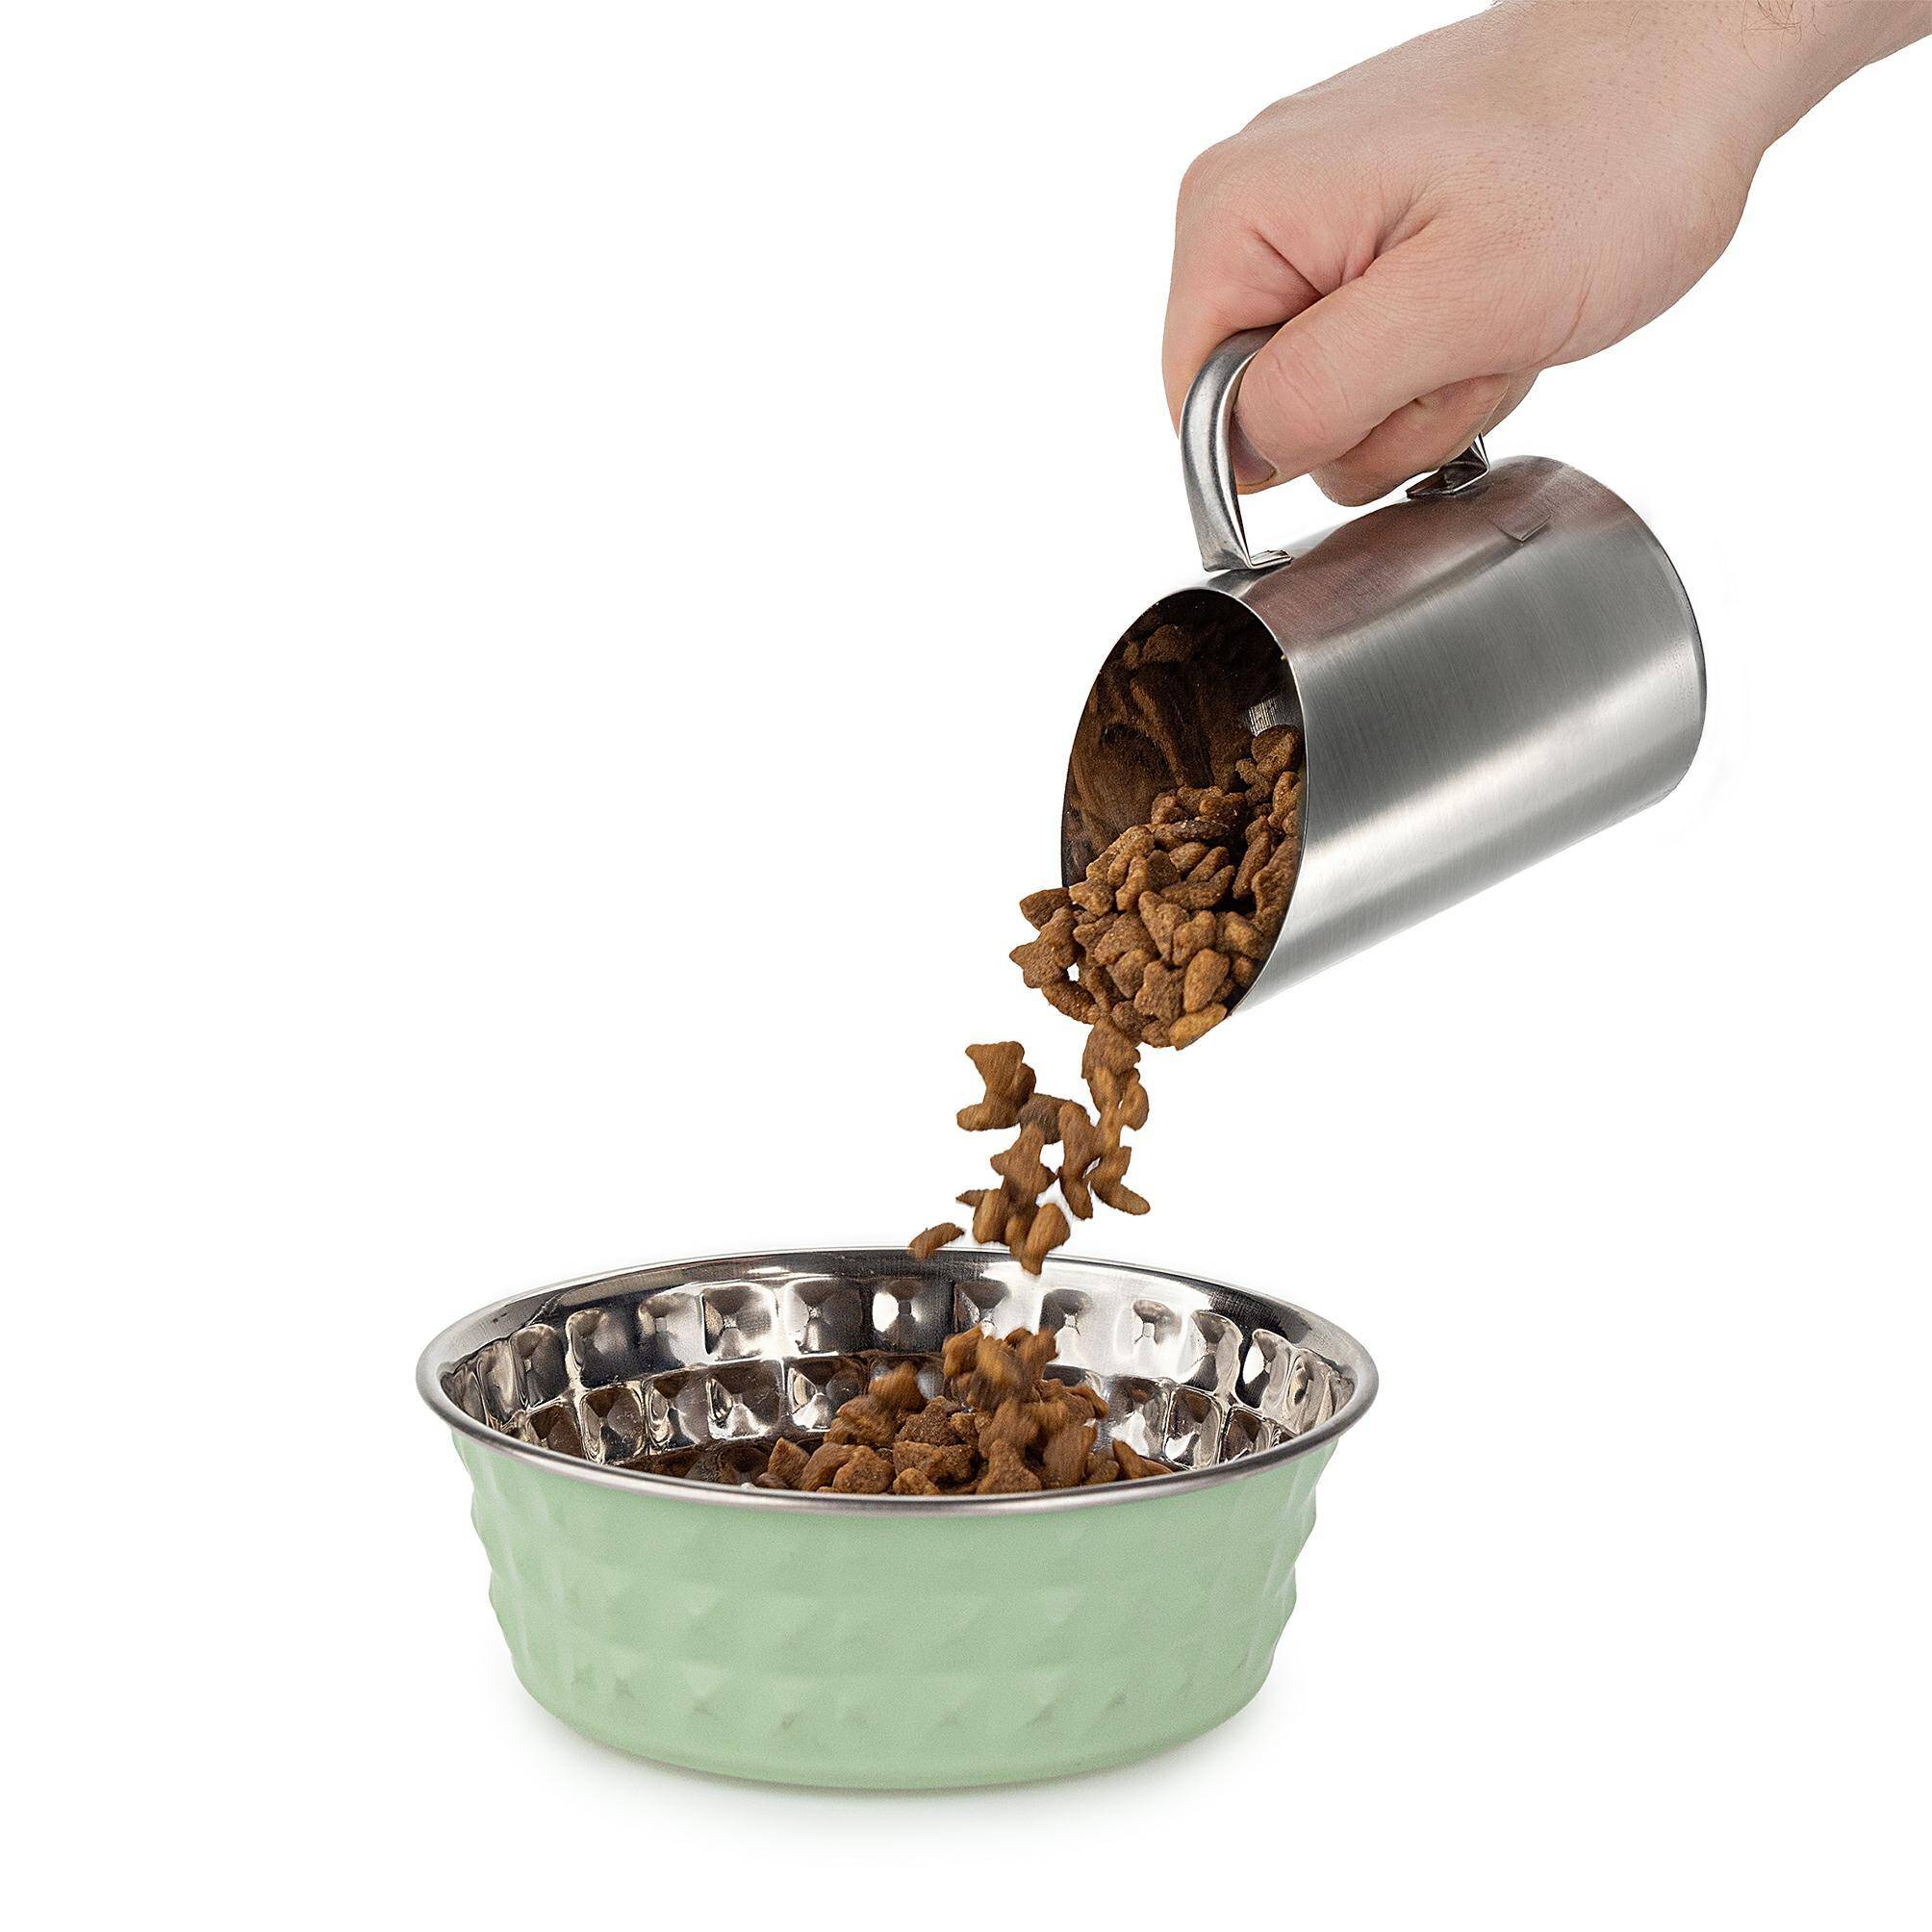 Measuring Cup for Pet Food (Photo 3)